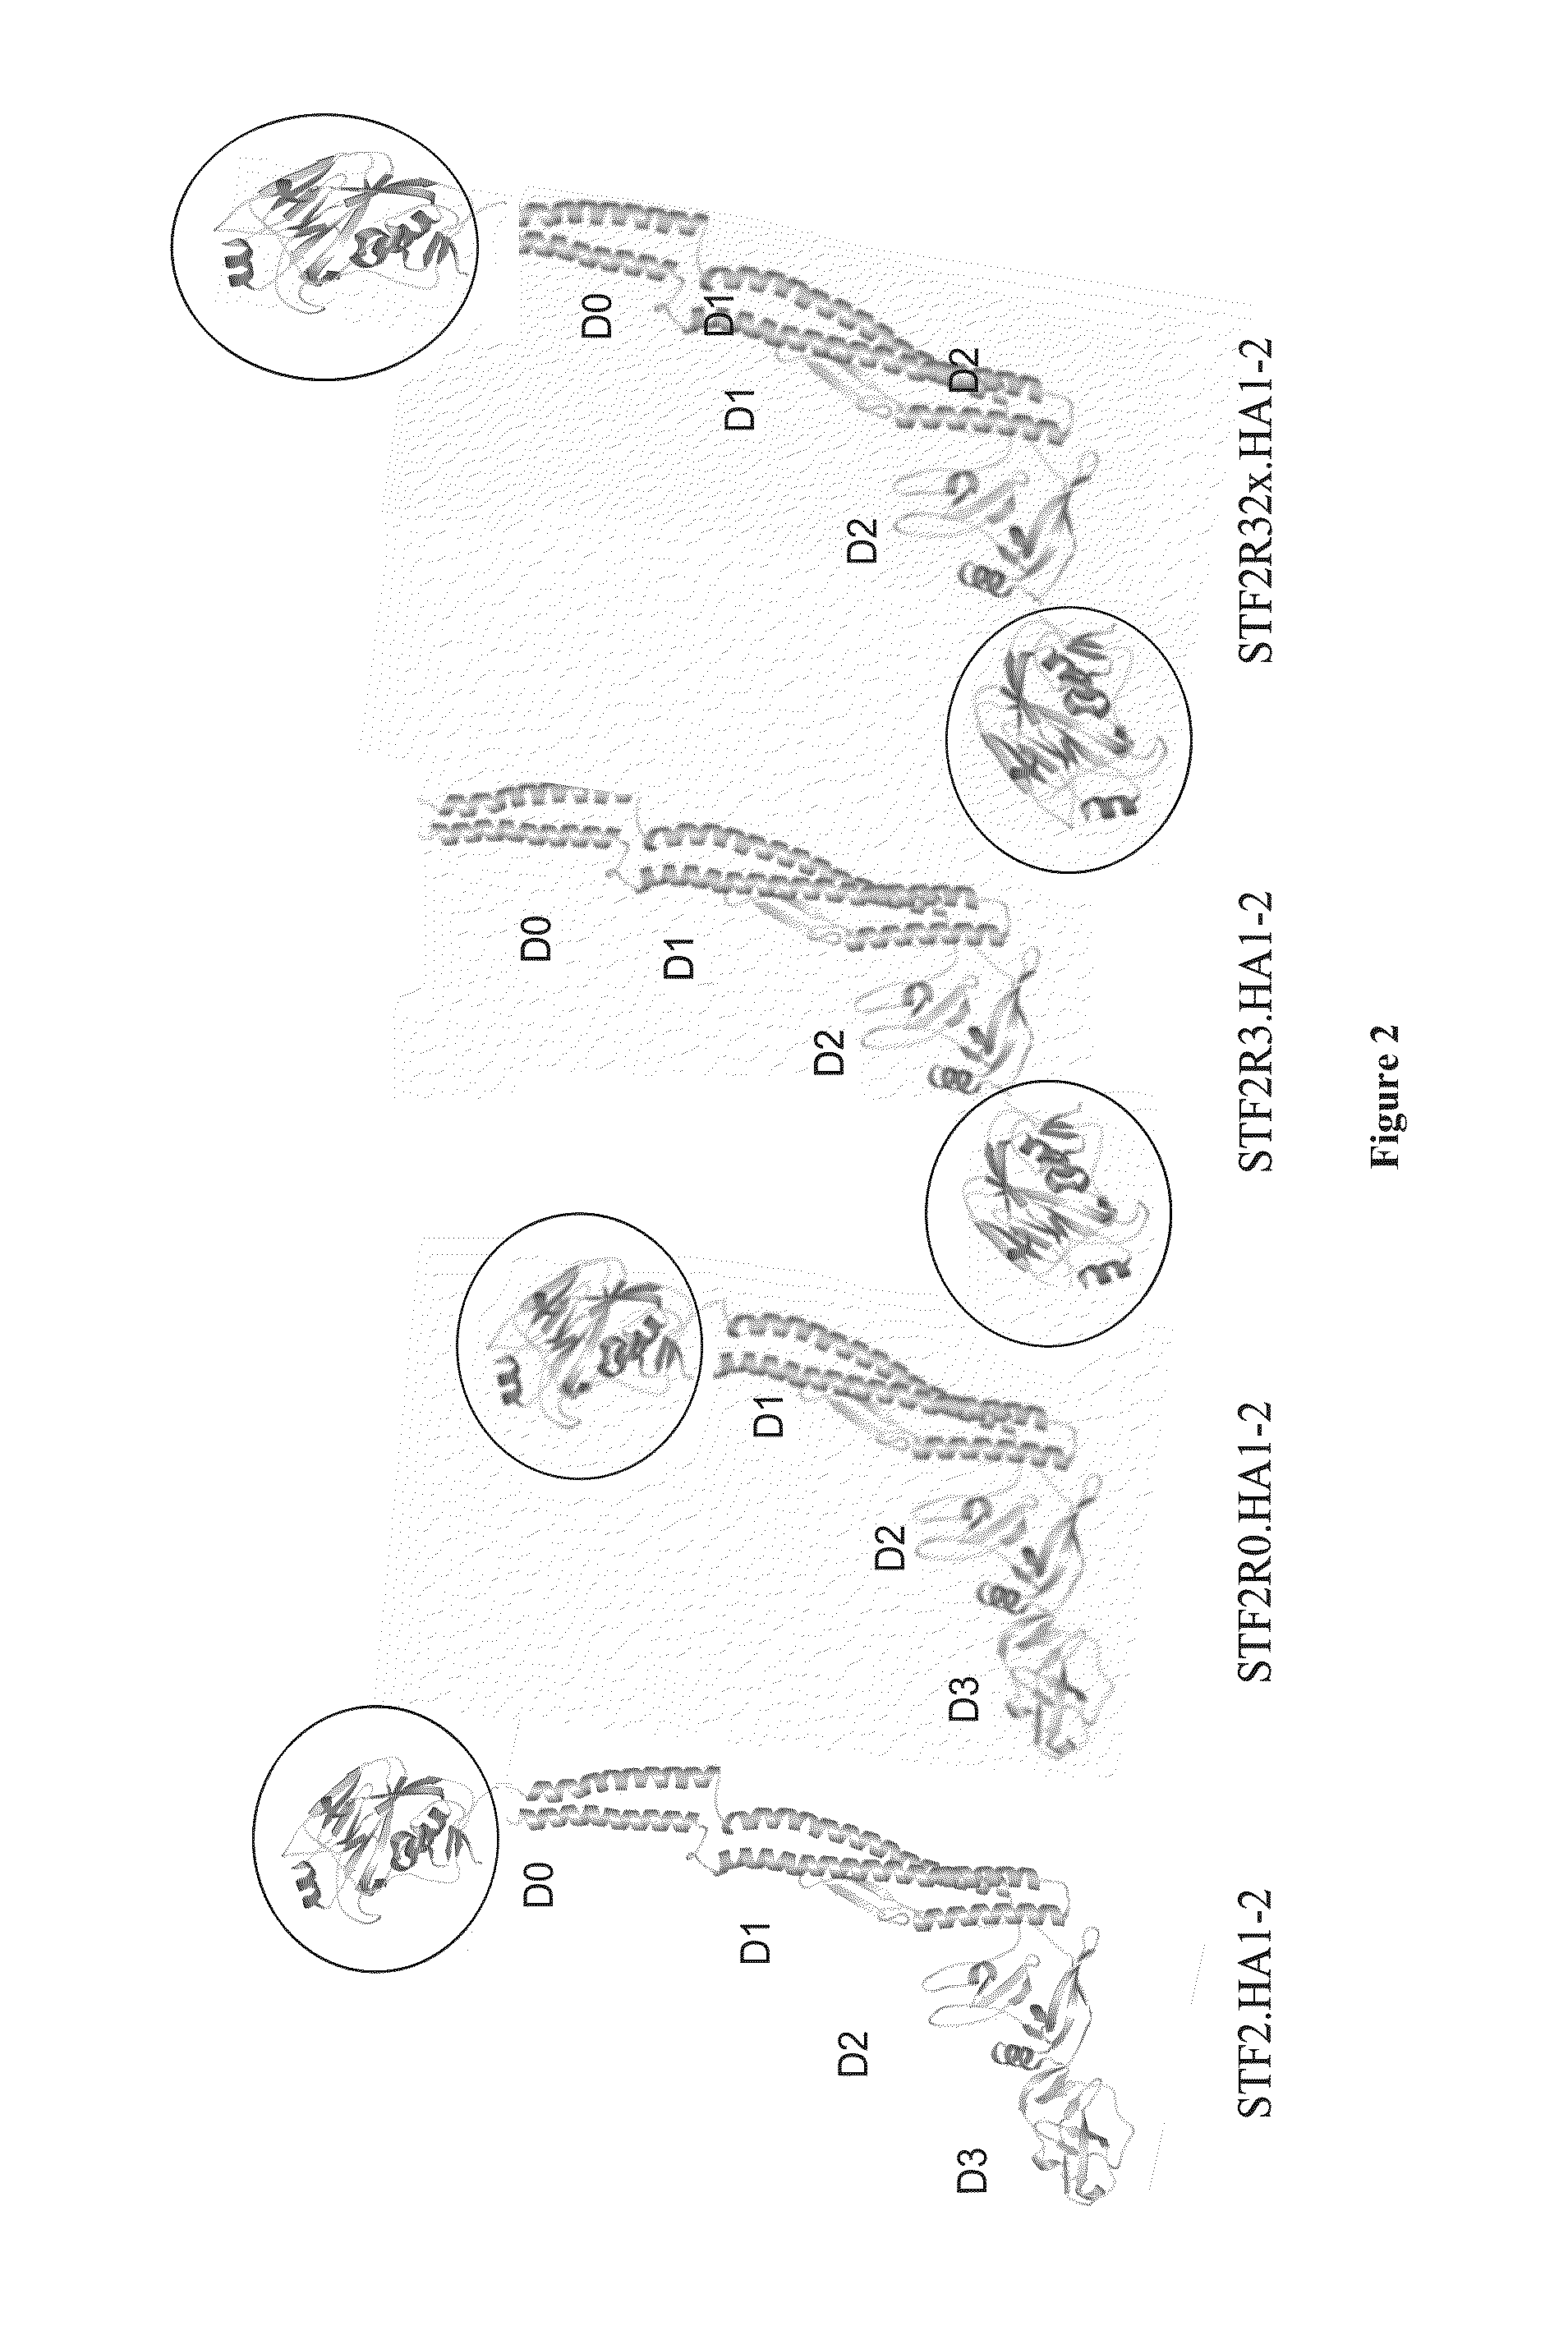 Deletion Mutants of Flagellin and Methods of Use